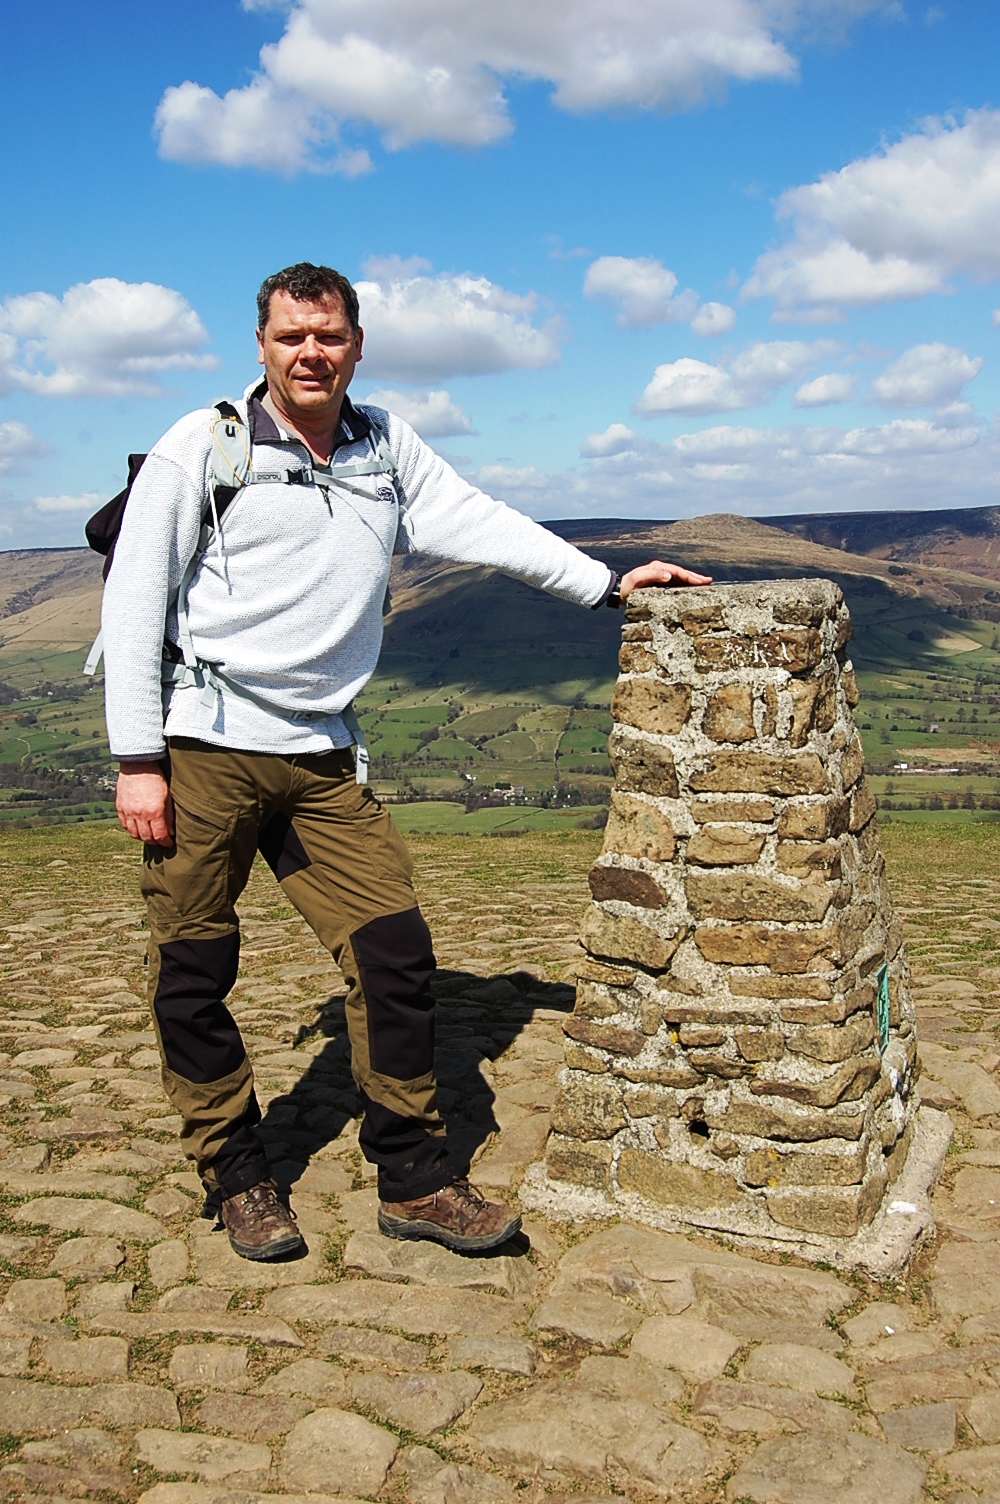 Adrian's walk is a 56 mile, 3 day hike from Bakewell to Edale